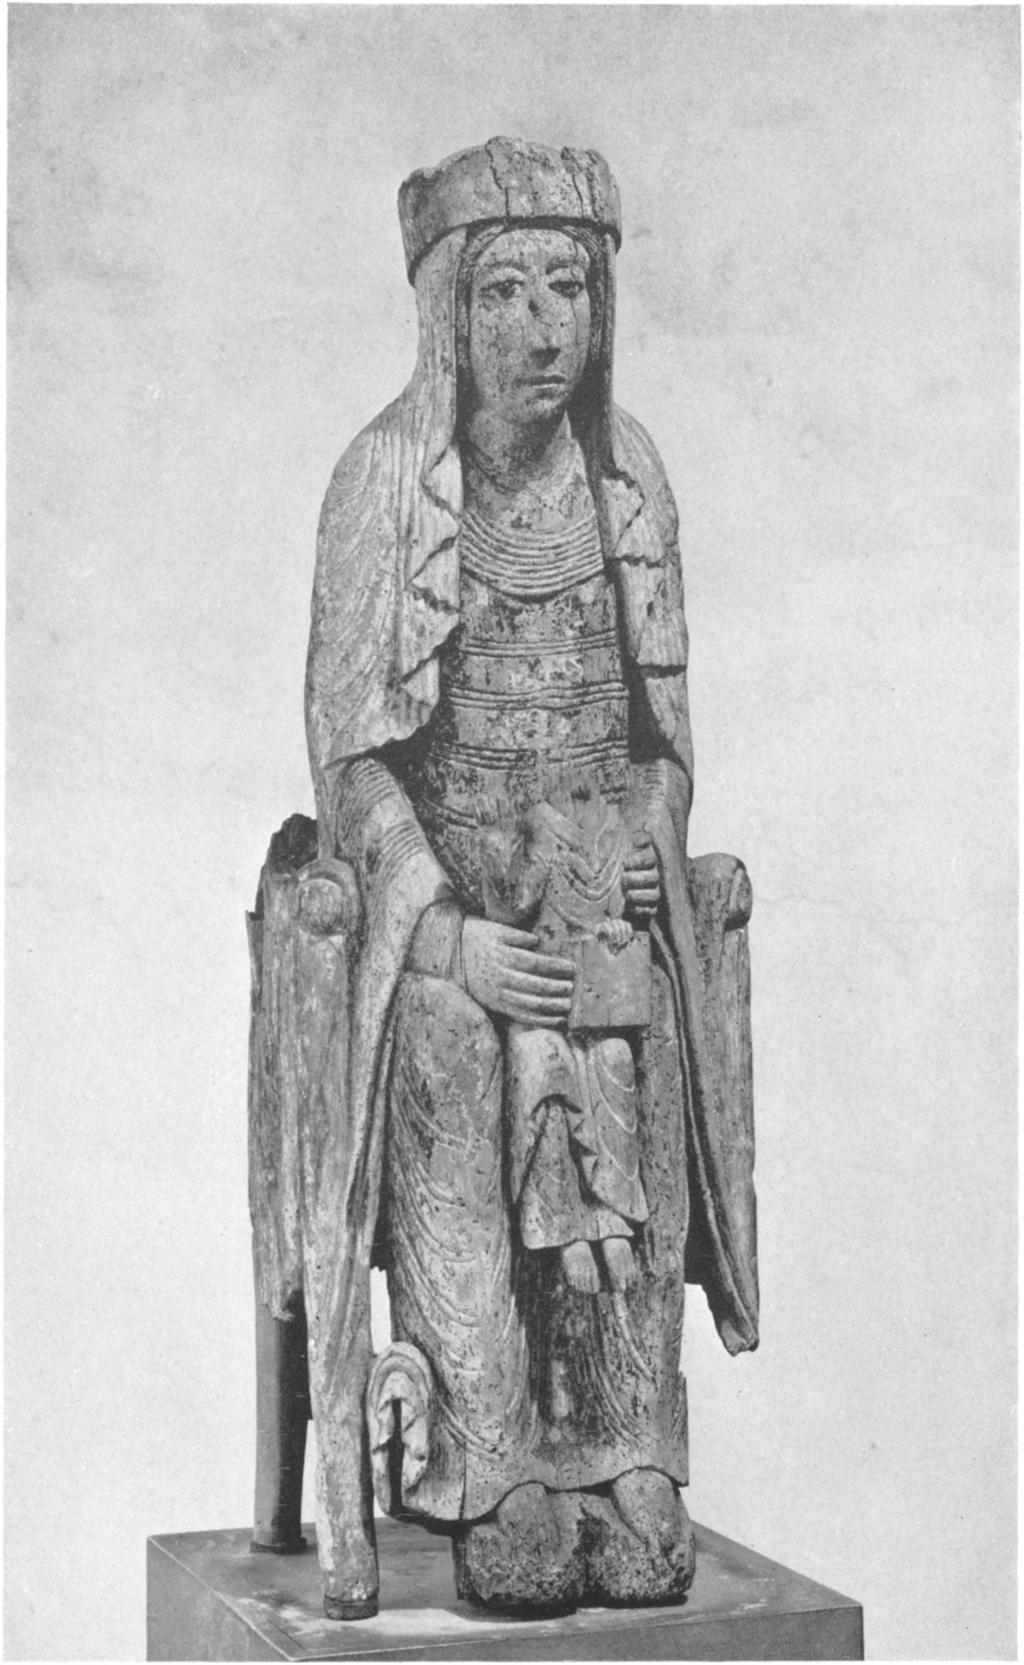 t. 'Mr The Virgin enthroned, from Autun. Purchased for The Cloisters with funds given by John D. Rockefeller, Jr.